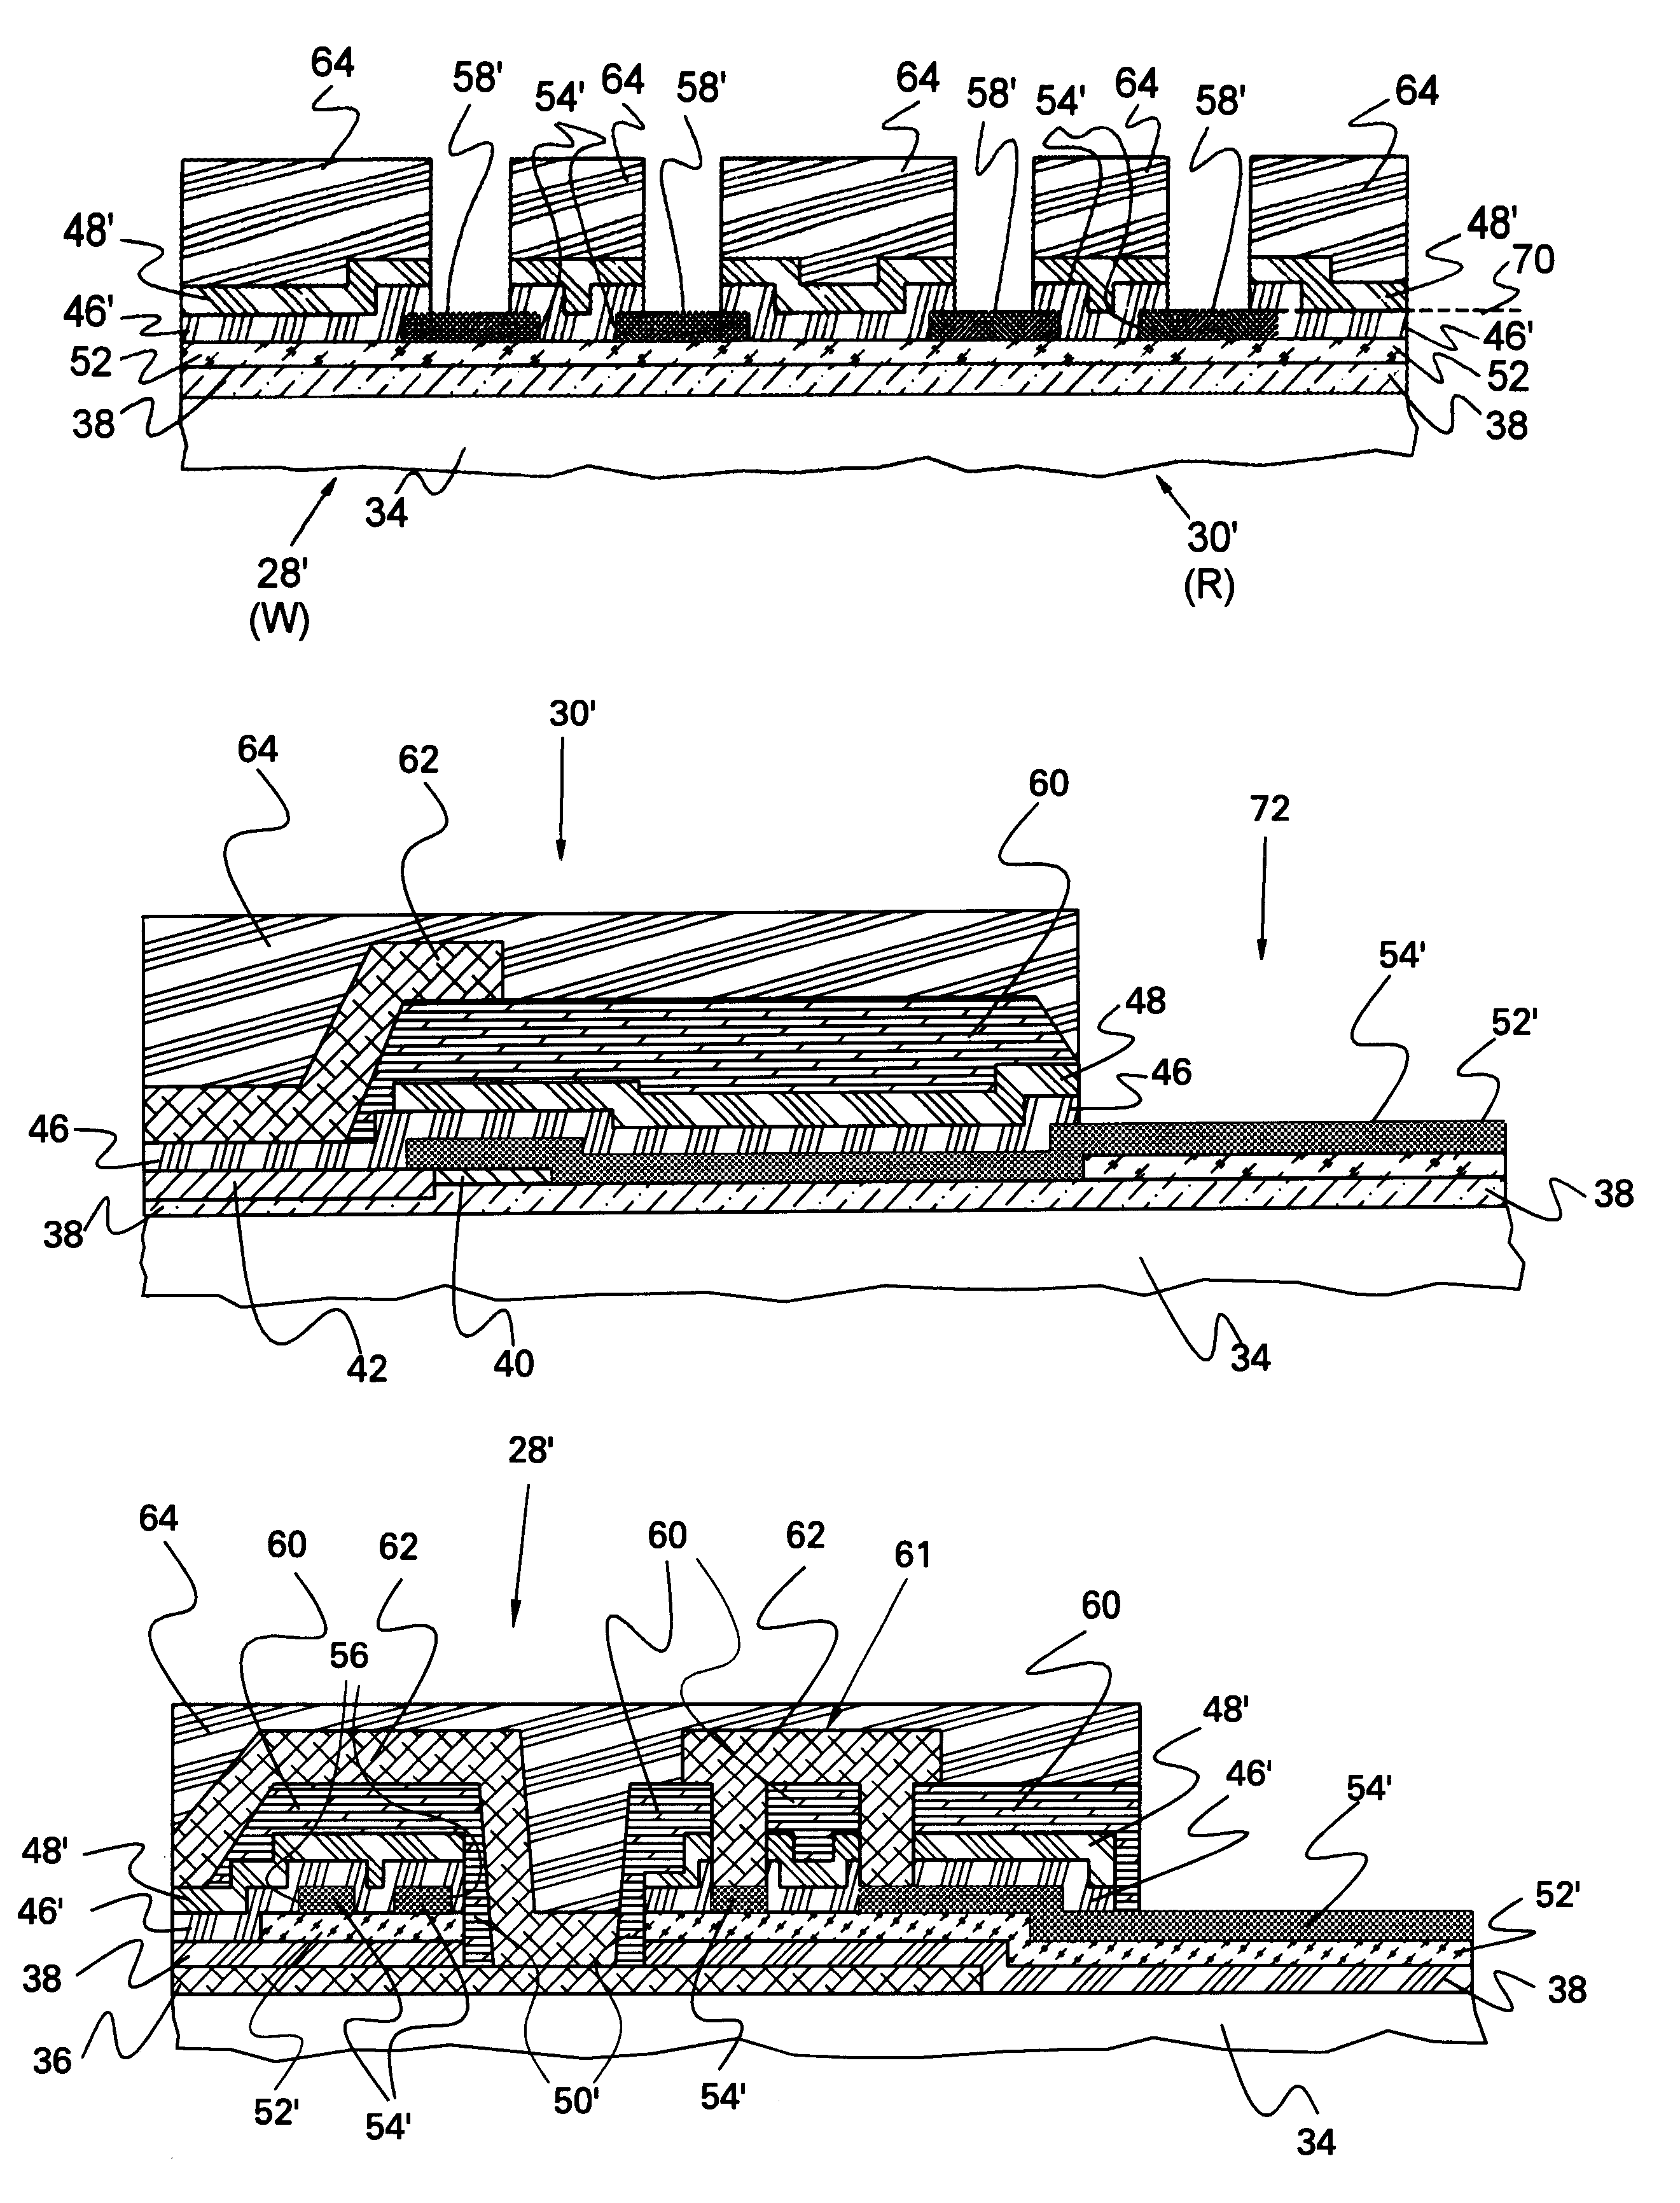 Planarized side by side design of an inductive writer and single metallic magnetoresistive reader